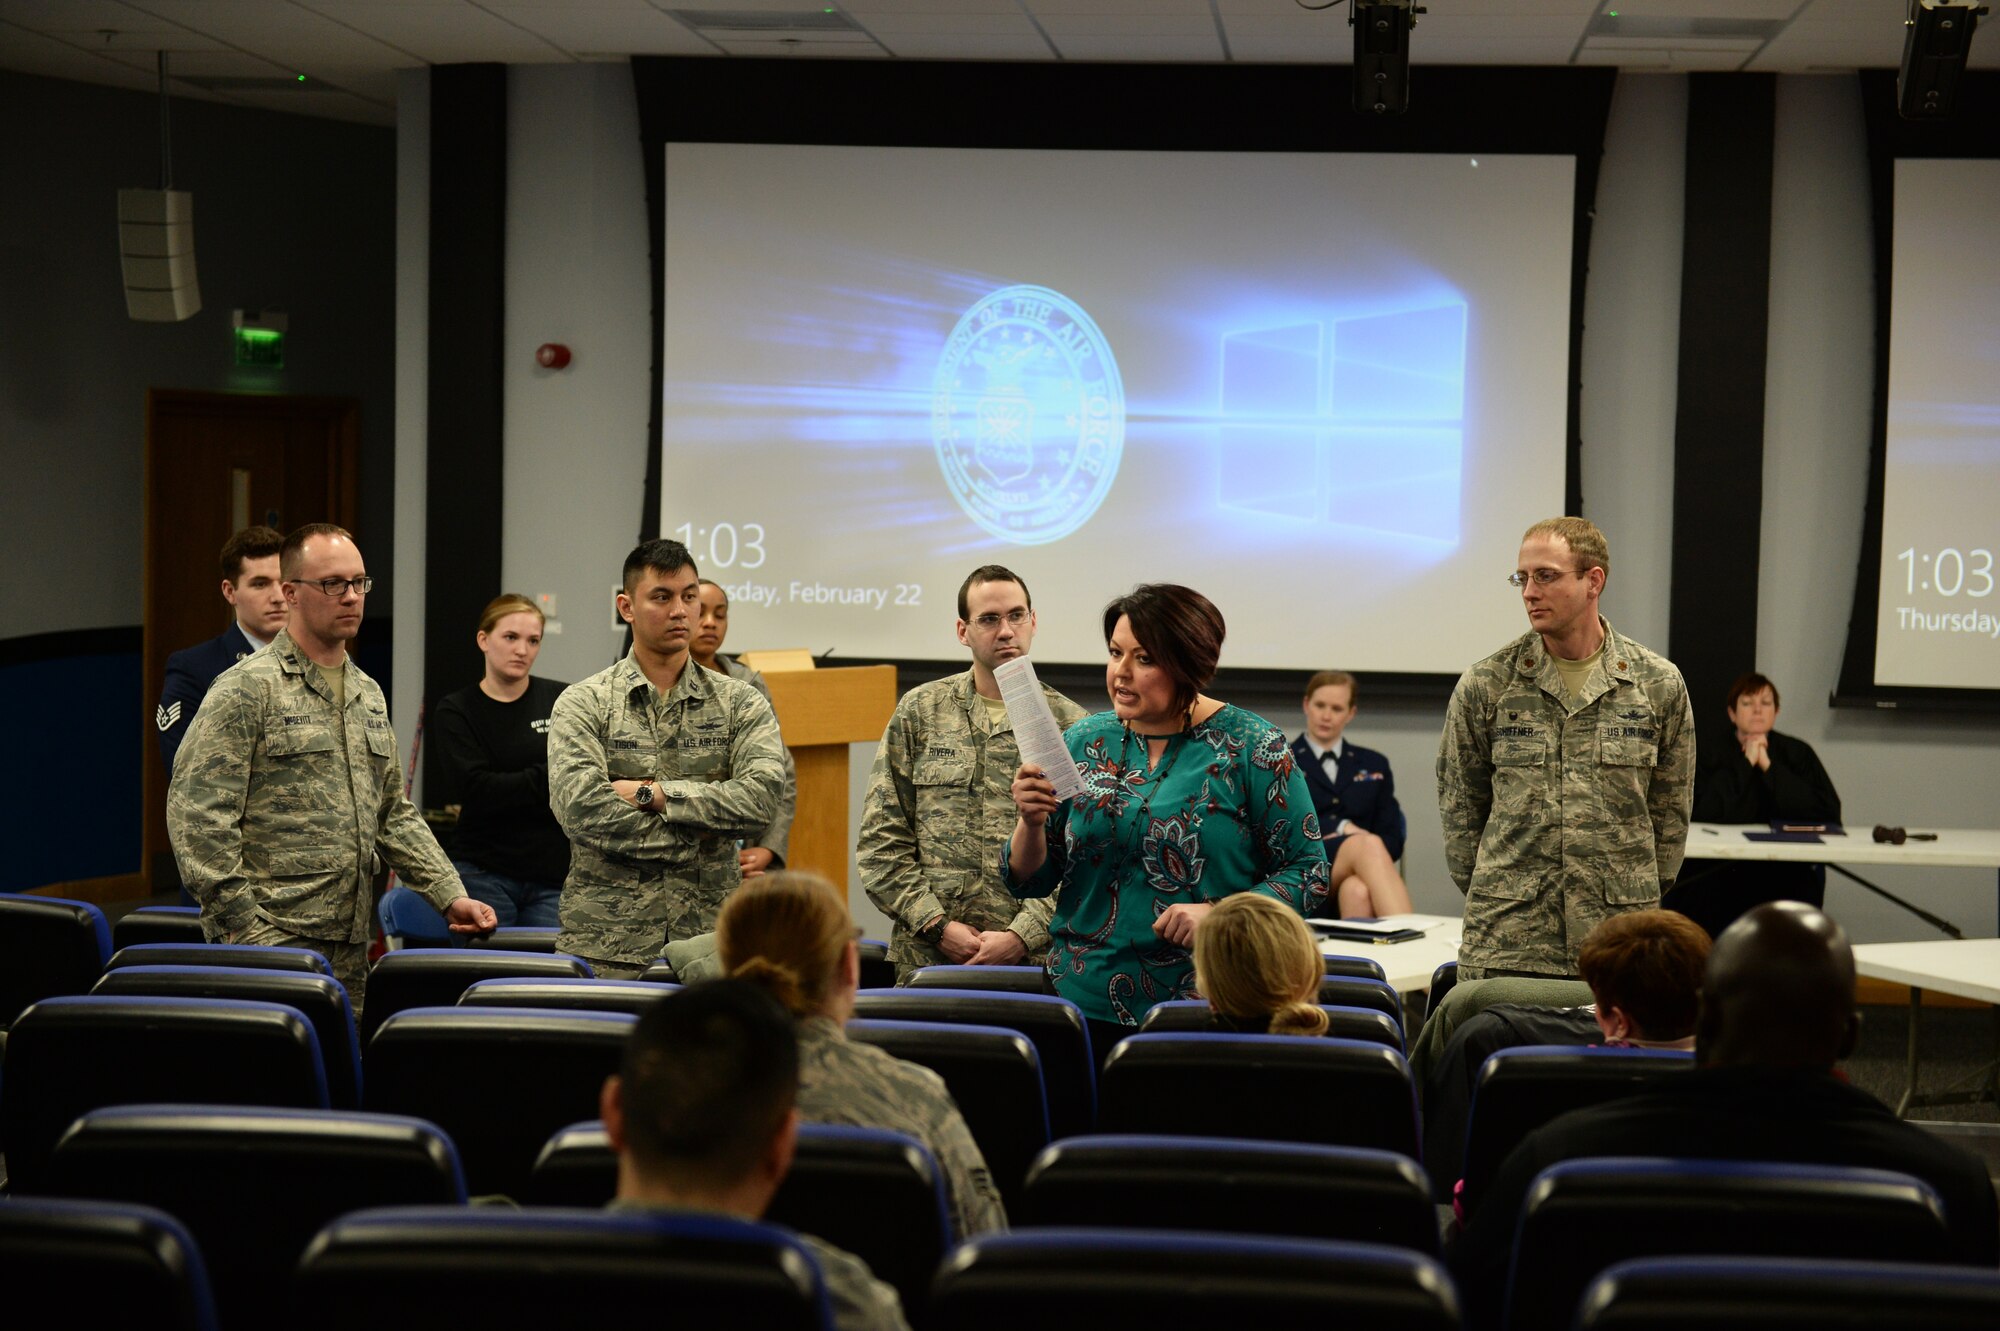 (courtesy photo) Carolina A. Yepez, the sexual assault prevention and response coordinator assigned to the 48th Fighter Wing, briefs the audience at a mock trial at the Strike Eagle Complex on Royal Air Force Lakenheath, England, Feb. 22, 2018. Yepez asked several audience members to stand as a visual aide to depict how many individuals are involved in the initial reporting of sexual assault. (U.S. Air Force photo/Airman 1st Class Shanice Williams-Jones)